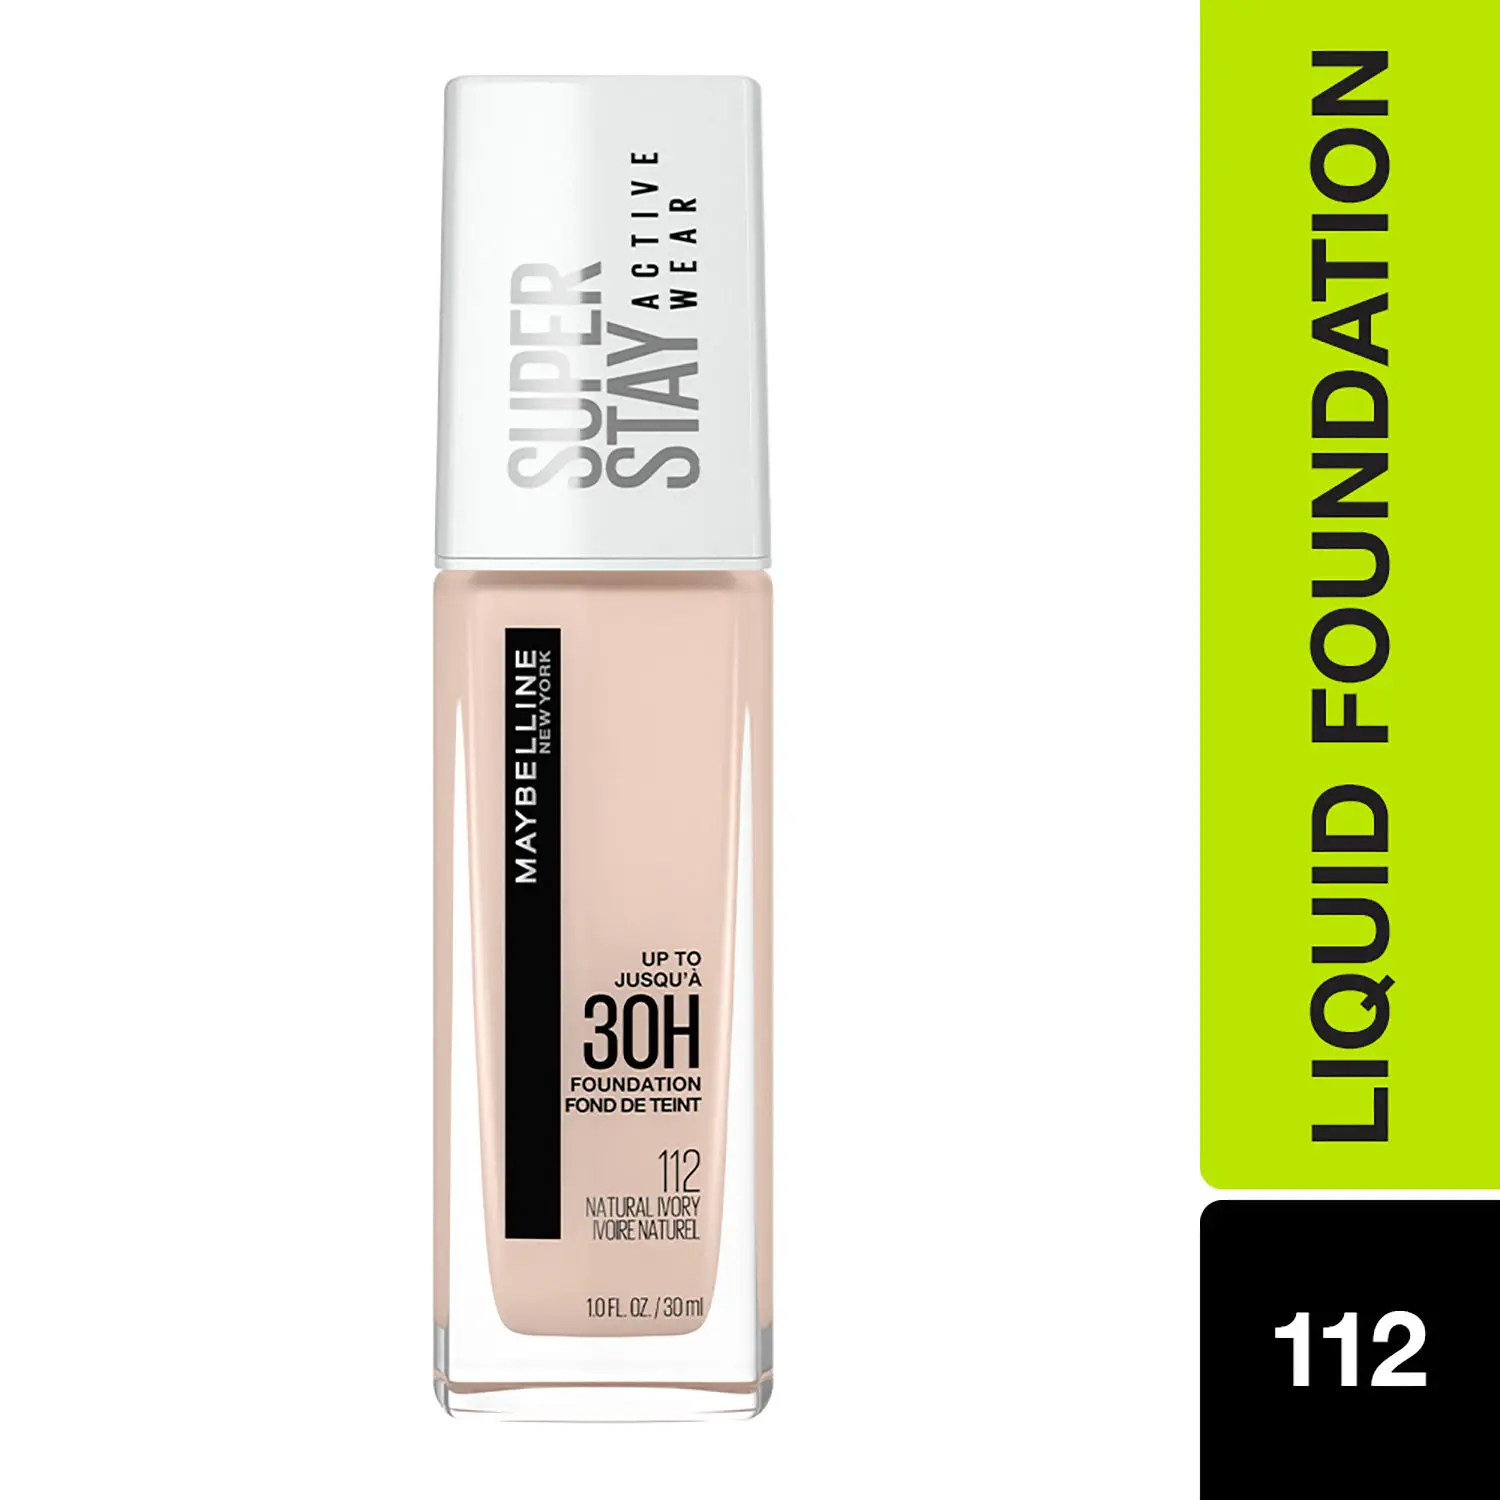 Maybelline New York Super Stay Full Coverage Active Wear Liquid Foundation , Matte Finish with 30 HR Wear, Transfer Proof, 112, Natural Ivory, 30ml